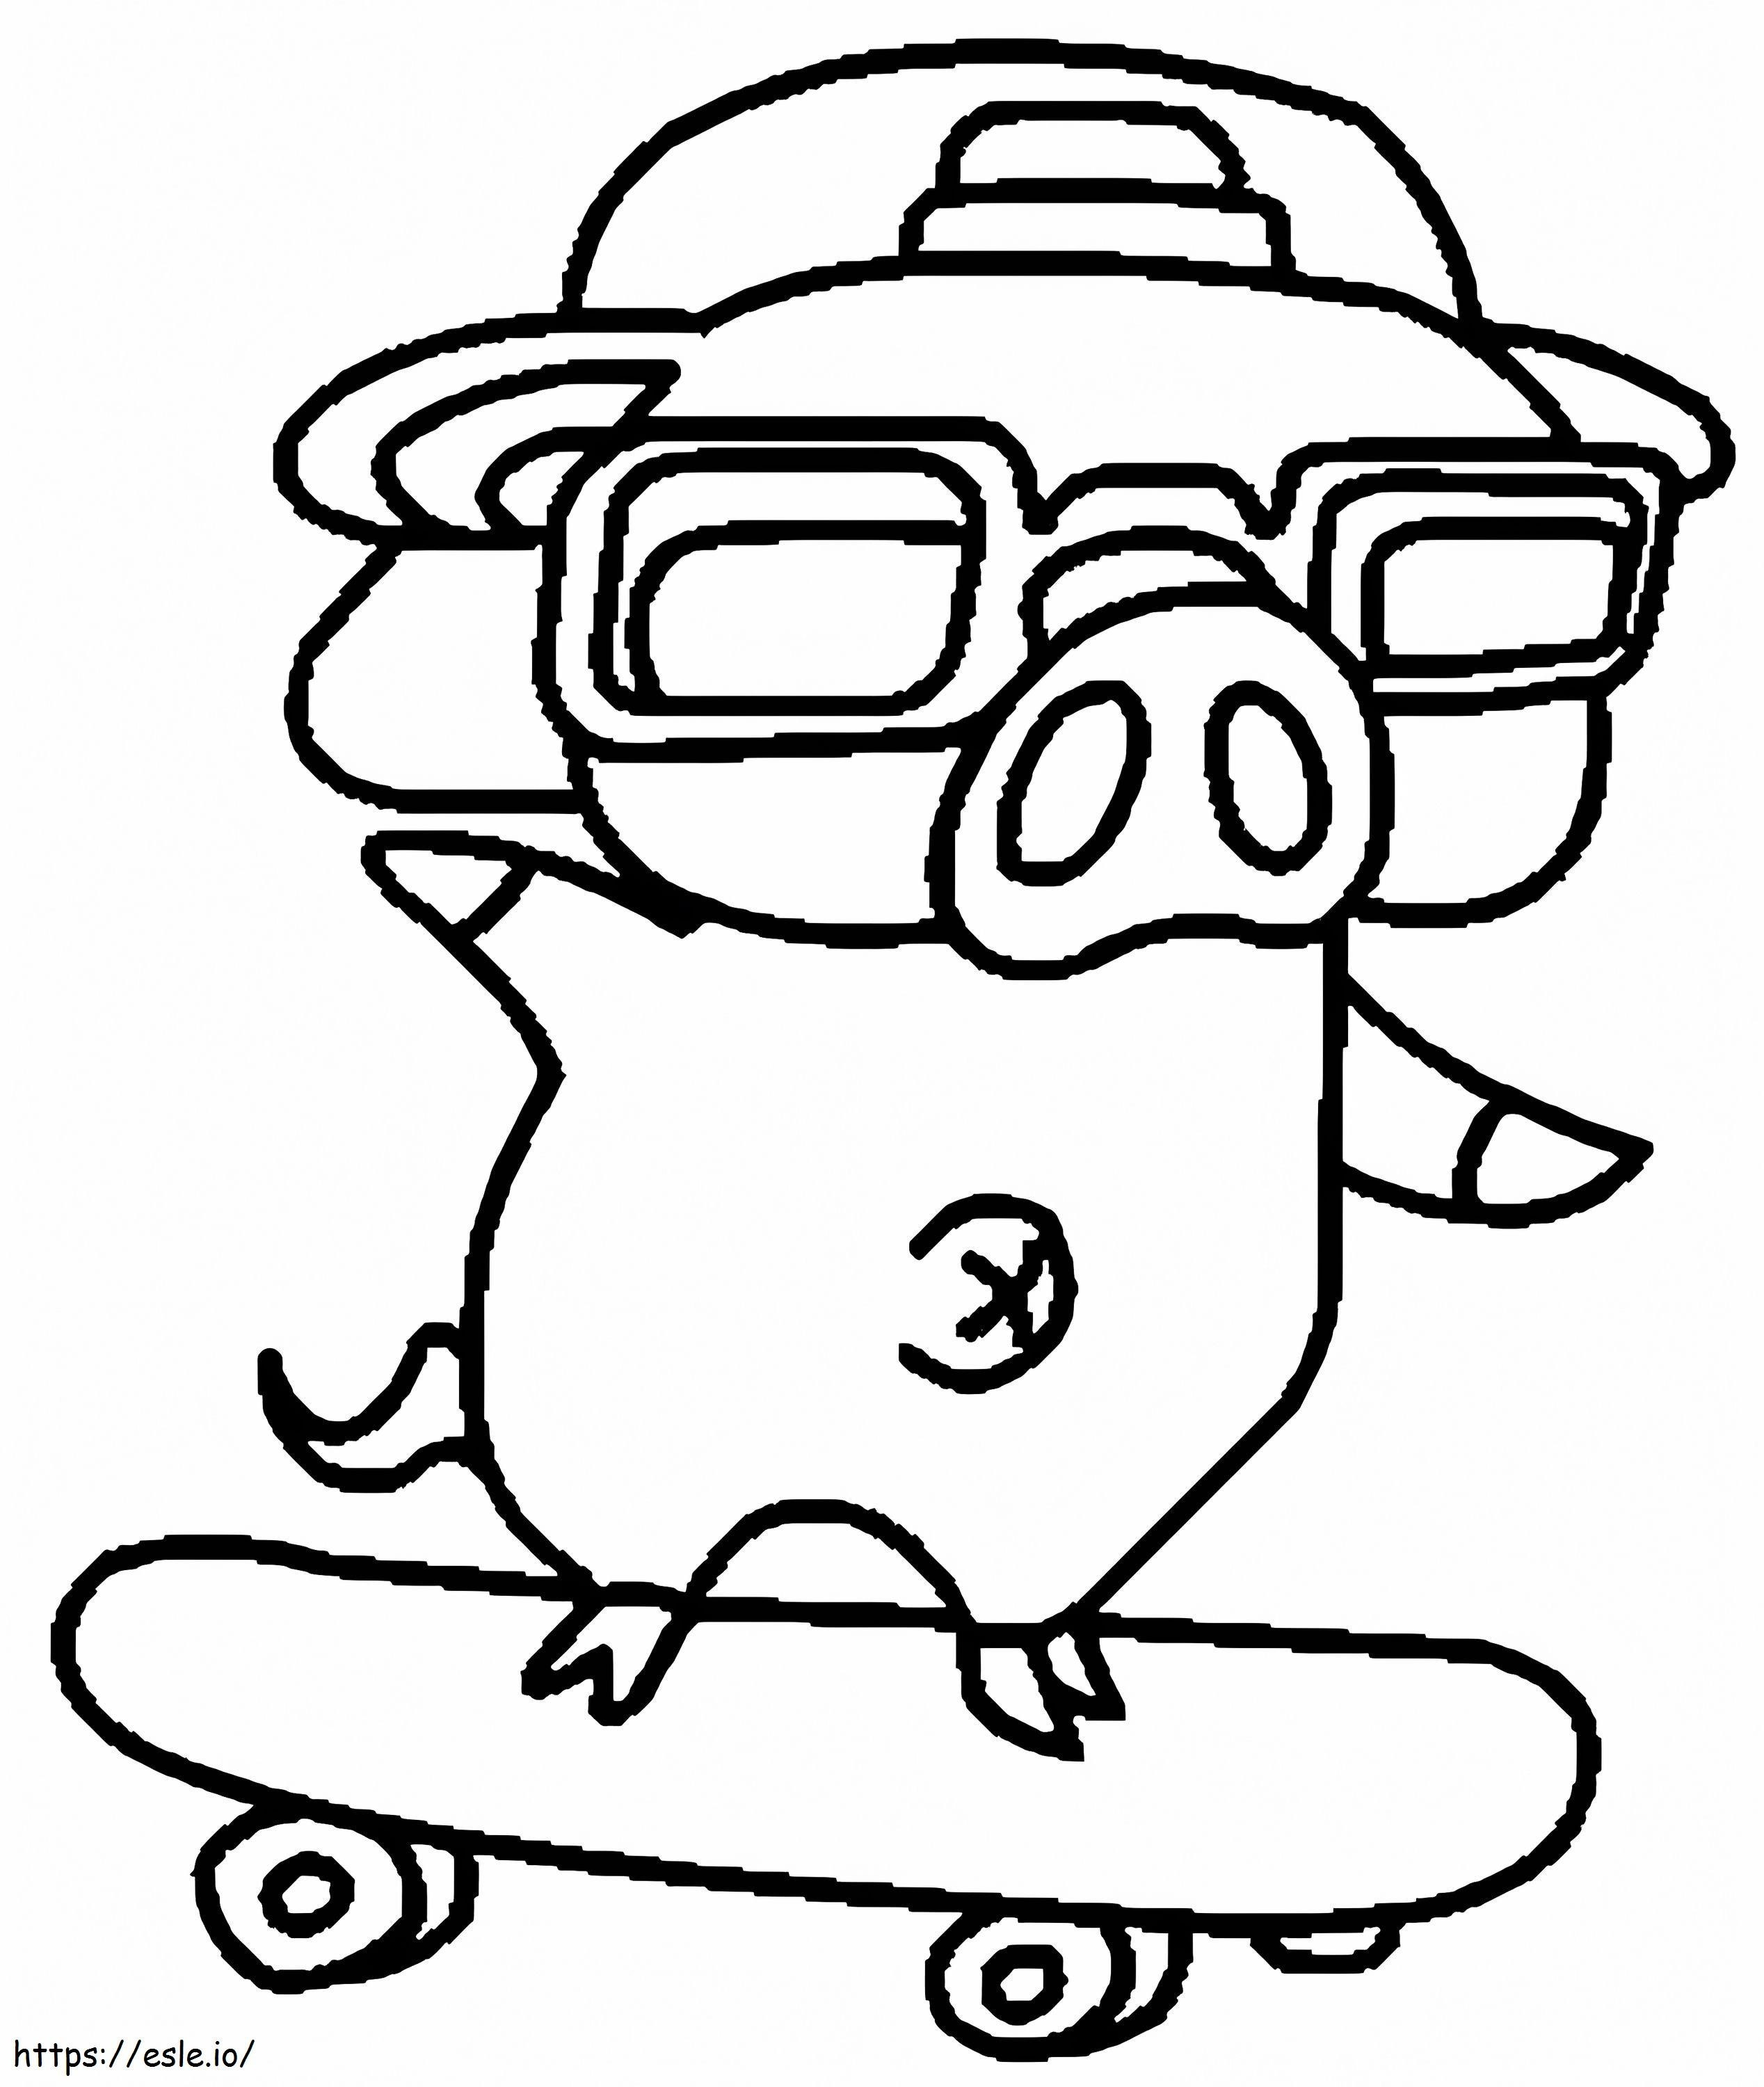 A Pig With Skateboard coloring page